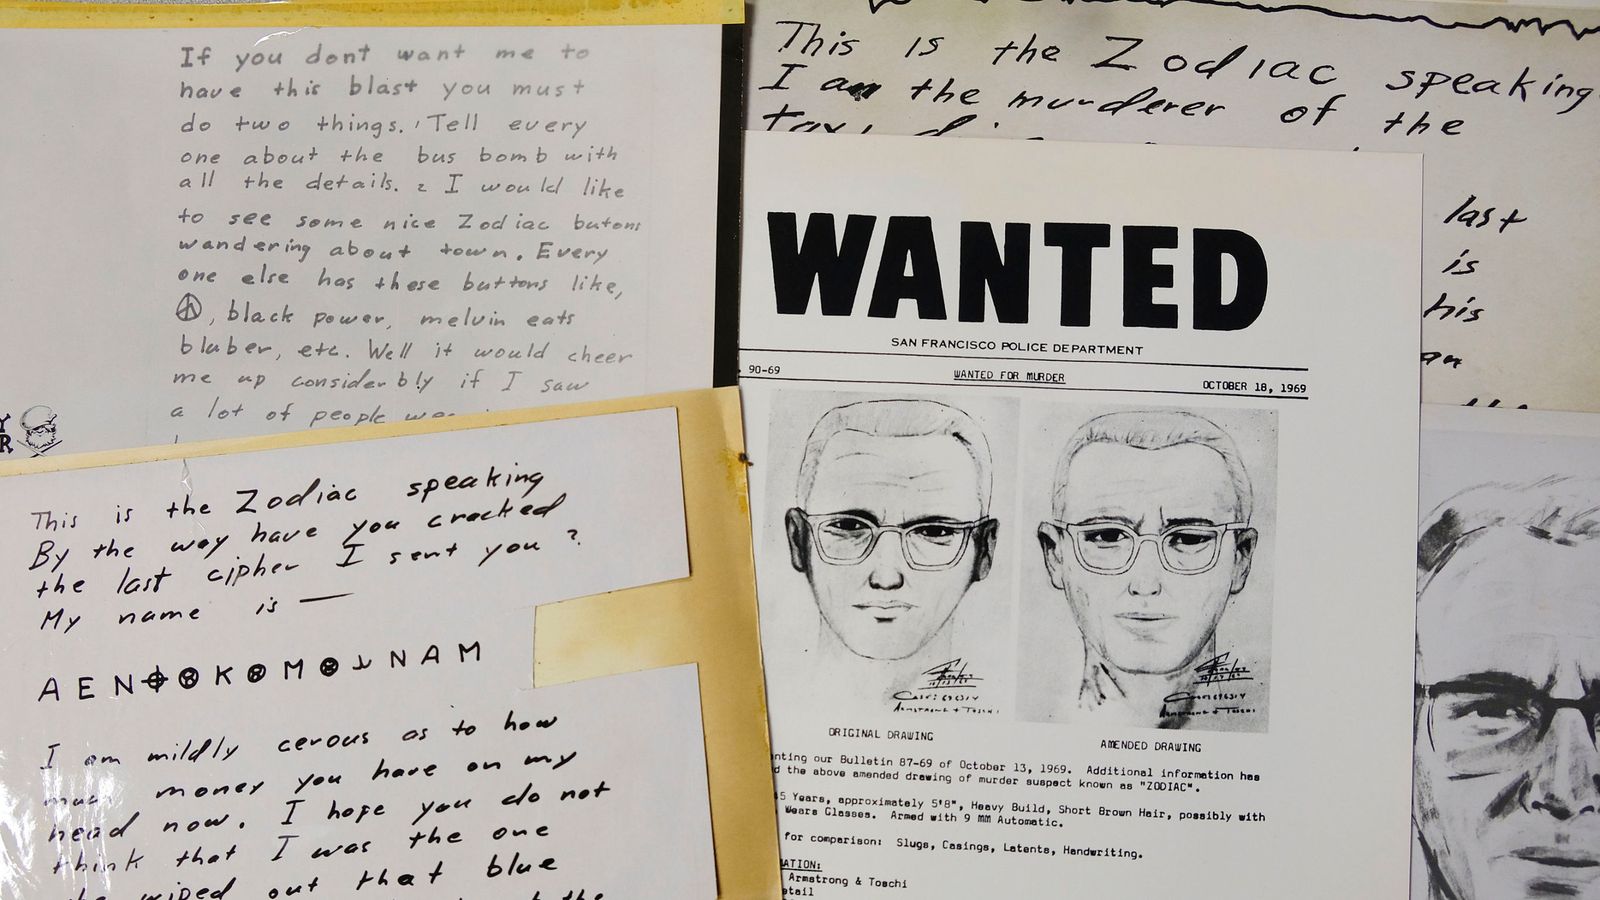 Infamous Zodiac Killer ‘Cracked’ Message ‘Cracked’ After More Than 50 Years |  US News